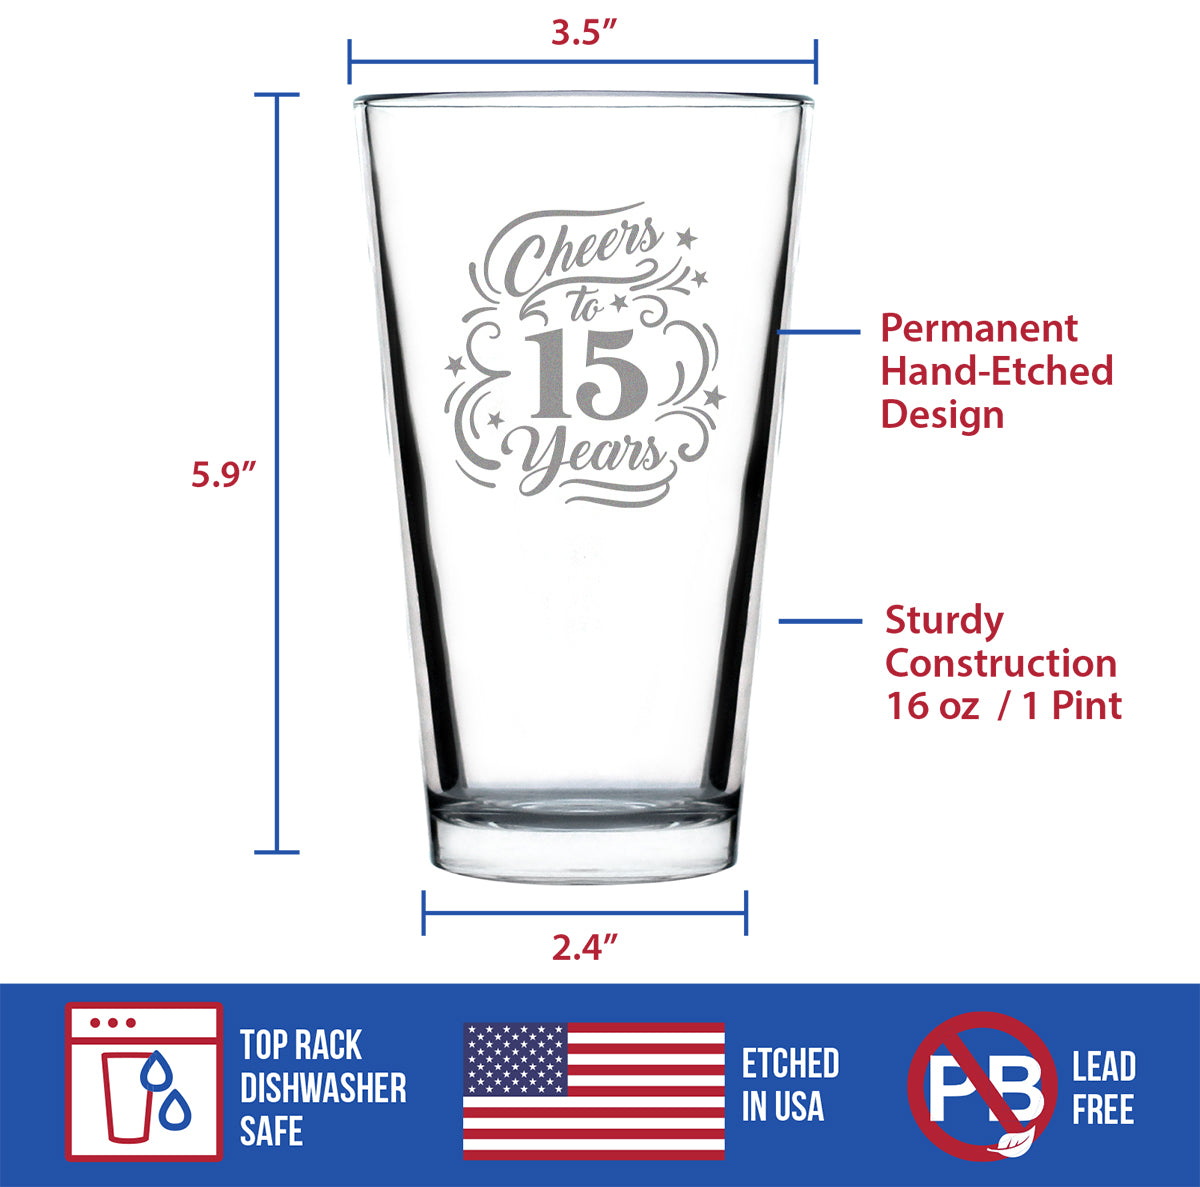 Cheers to 15 Years - Pint Glass for Beer - Gifts for Women &amp; Men - 15th Anniversary Party Decor - 16 Oz Glasses